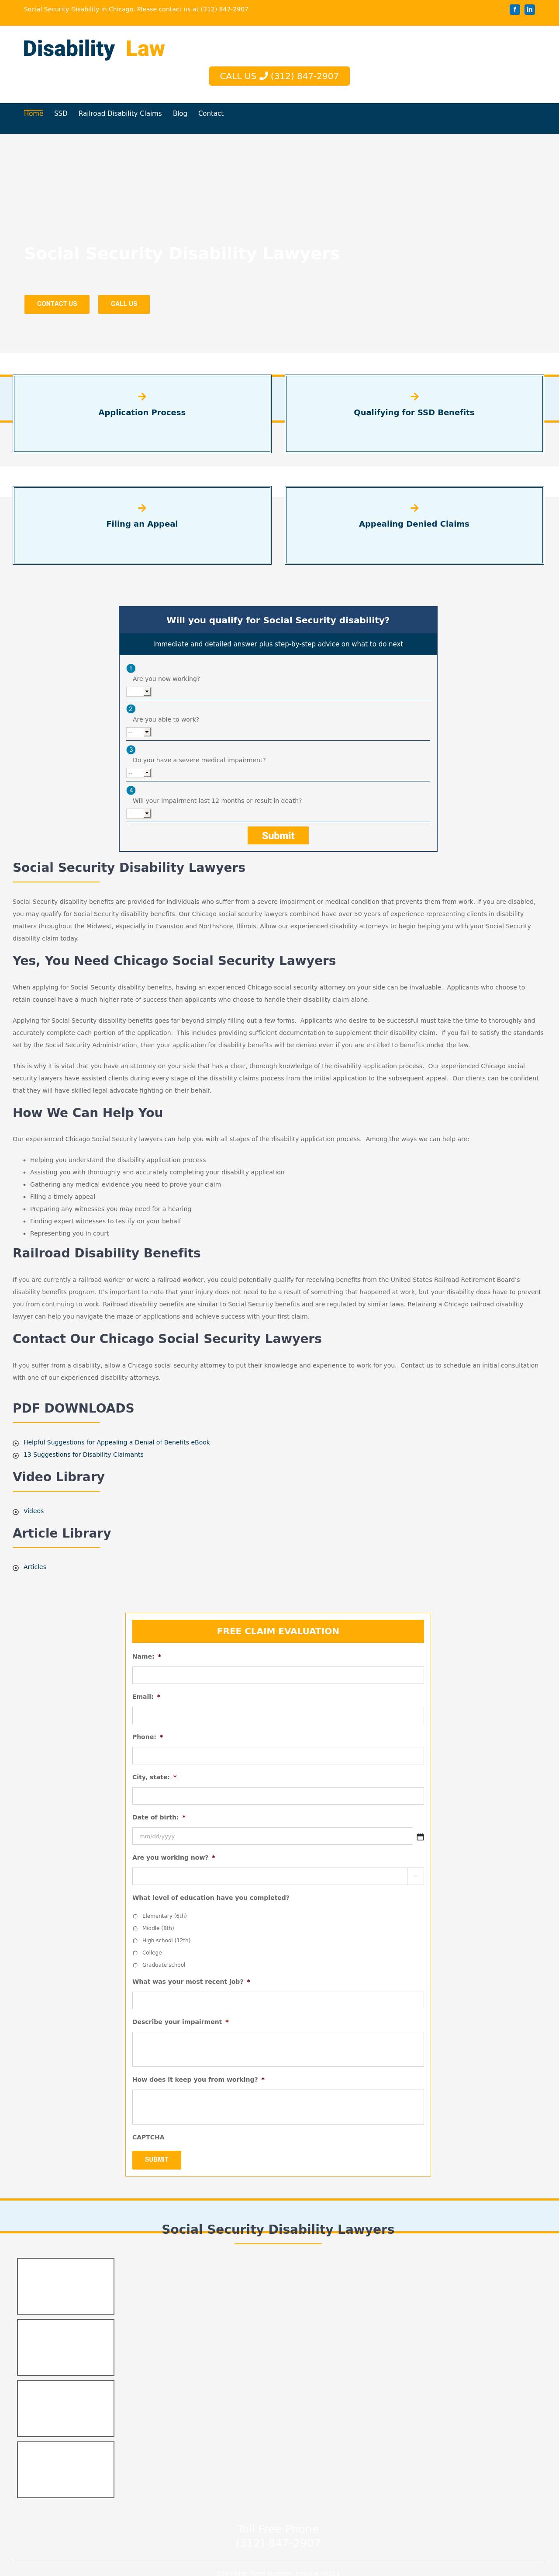 Daley Disability Law - Chicago IL Lawyers